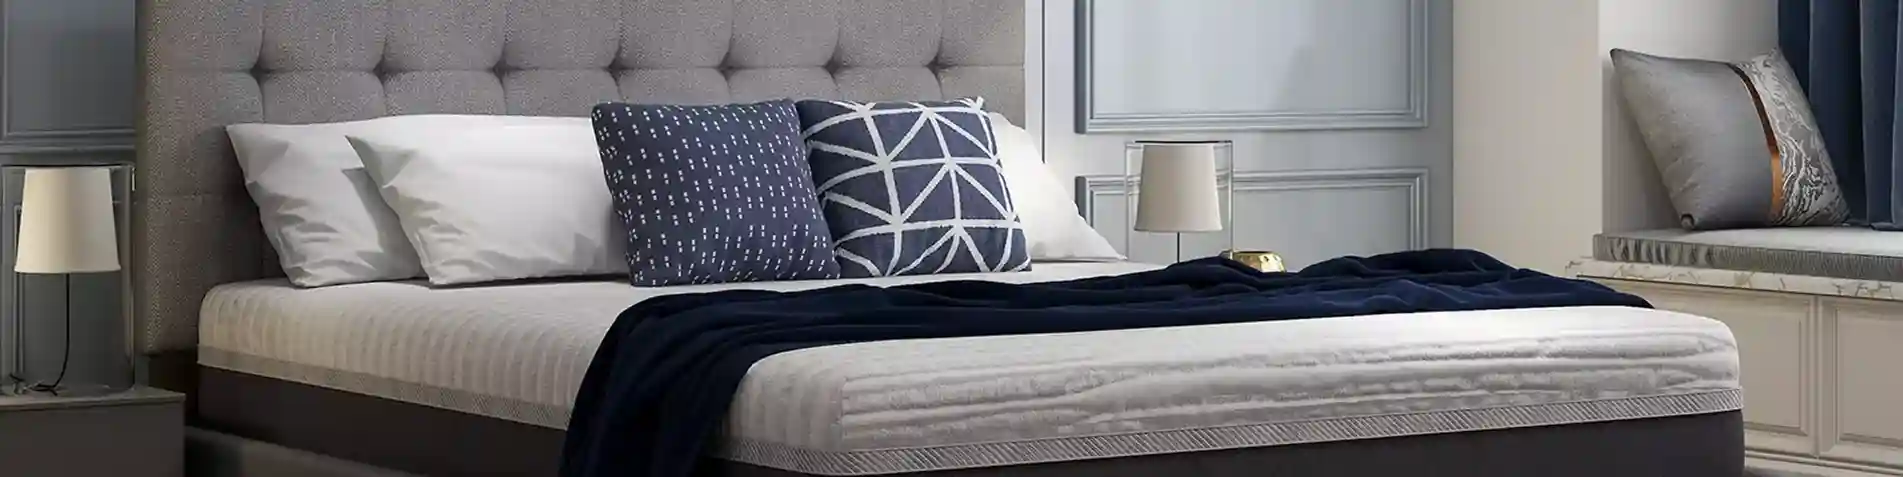 bed featured